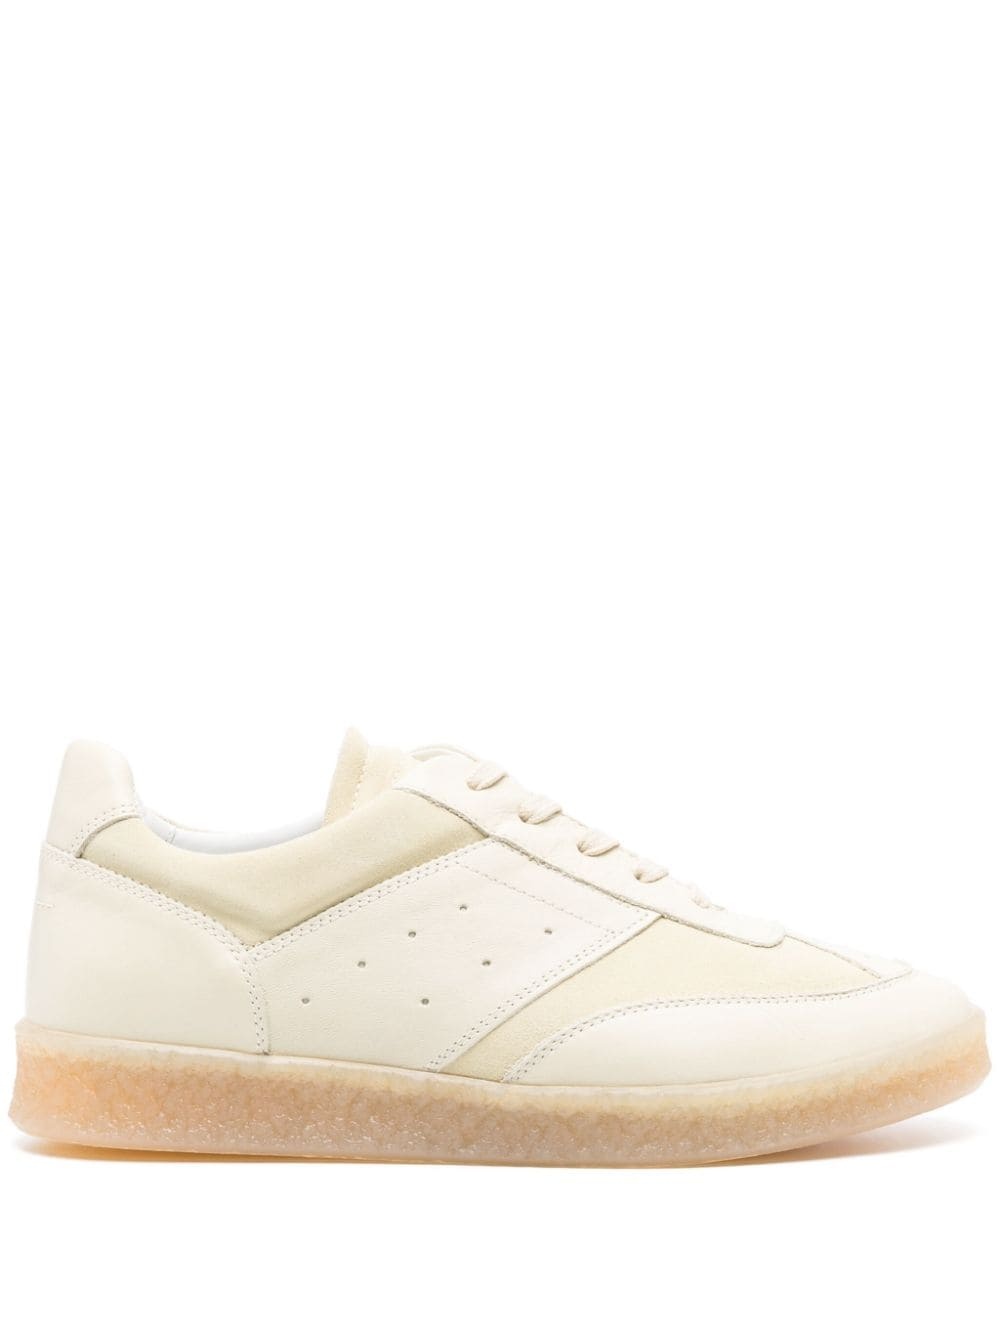 Replica panelled leather sneakers - 1